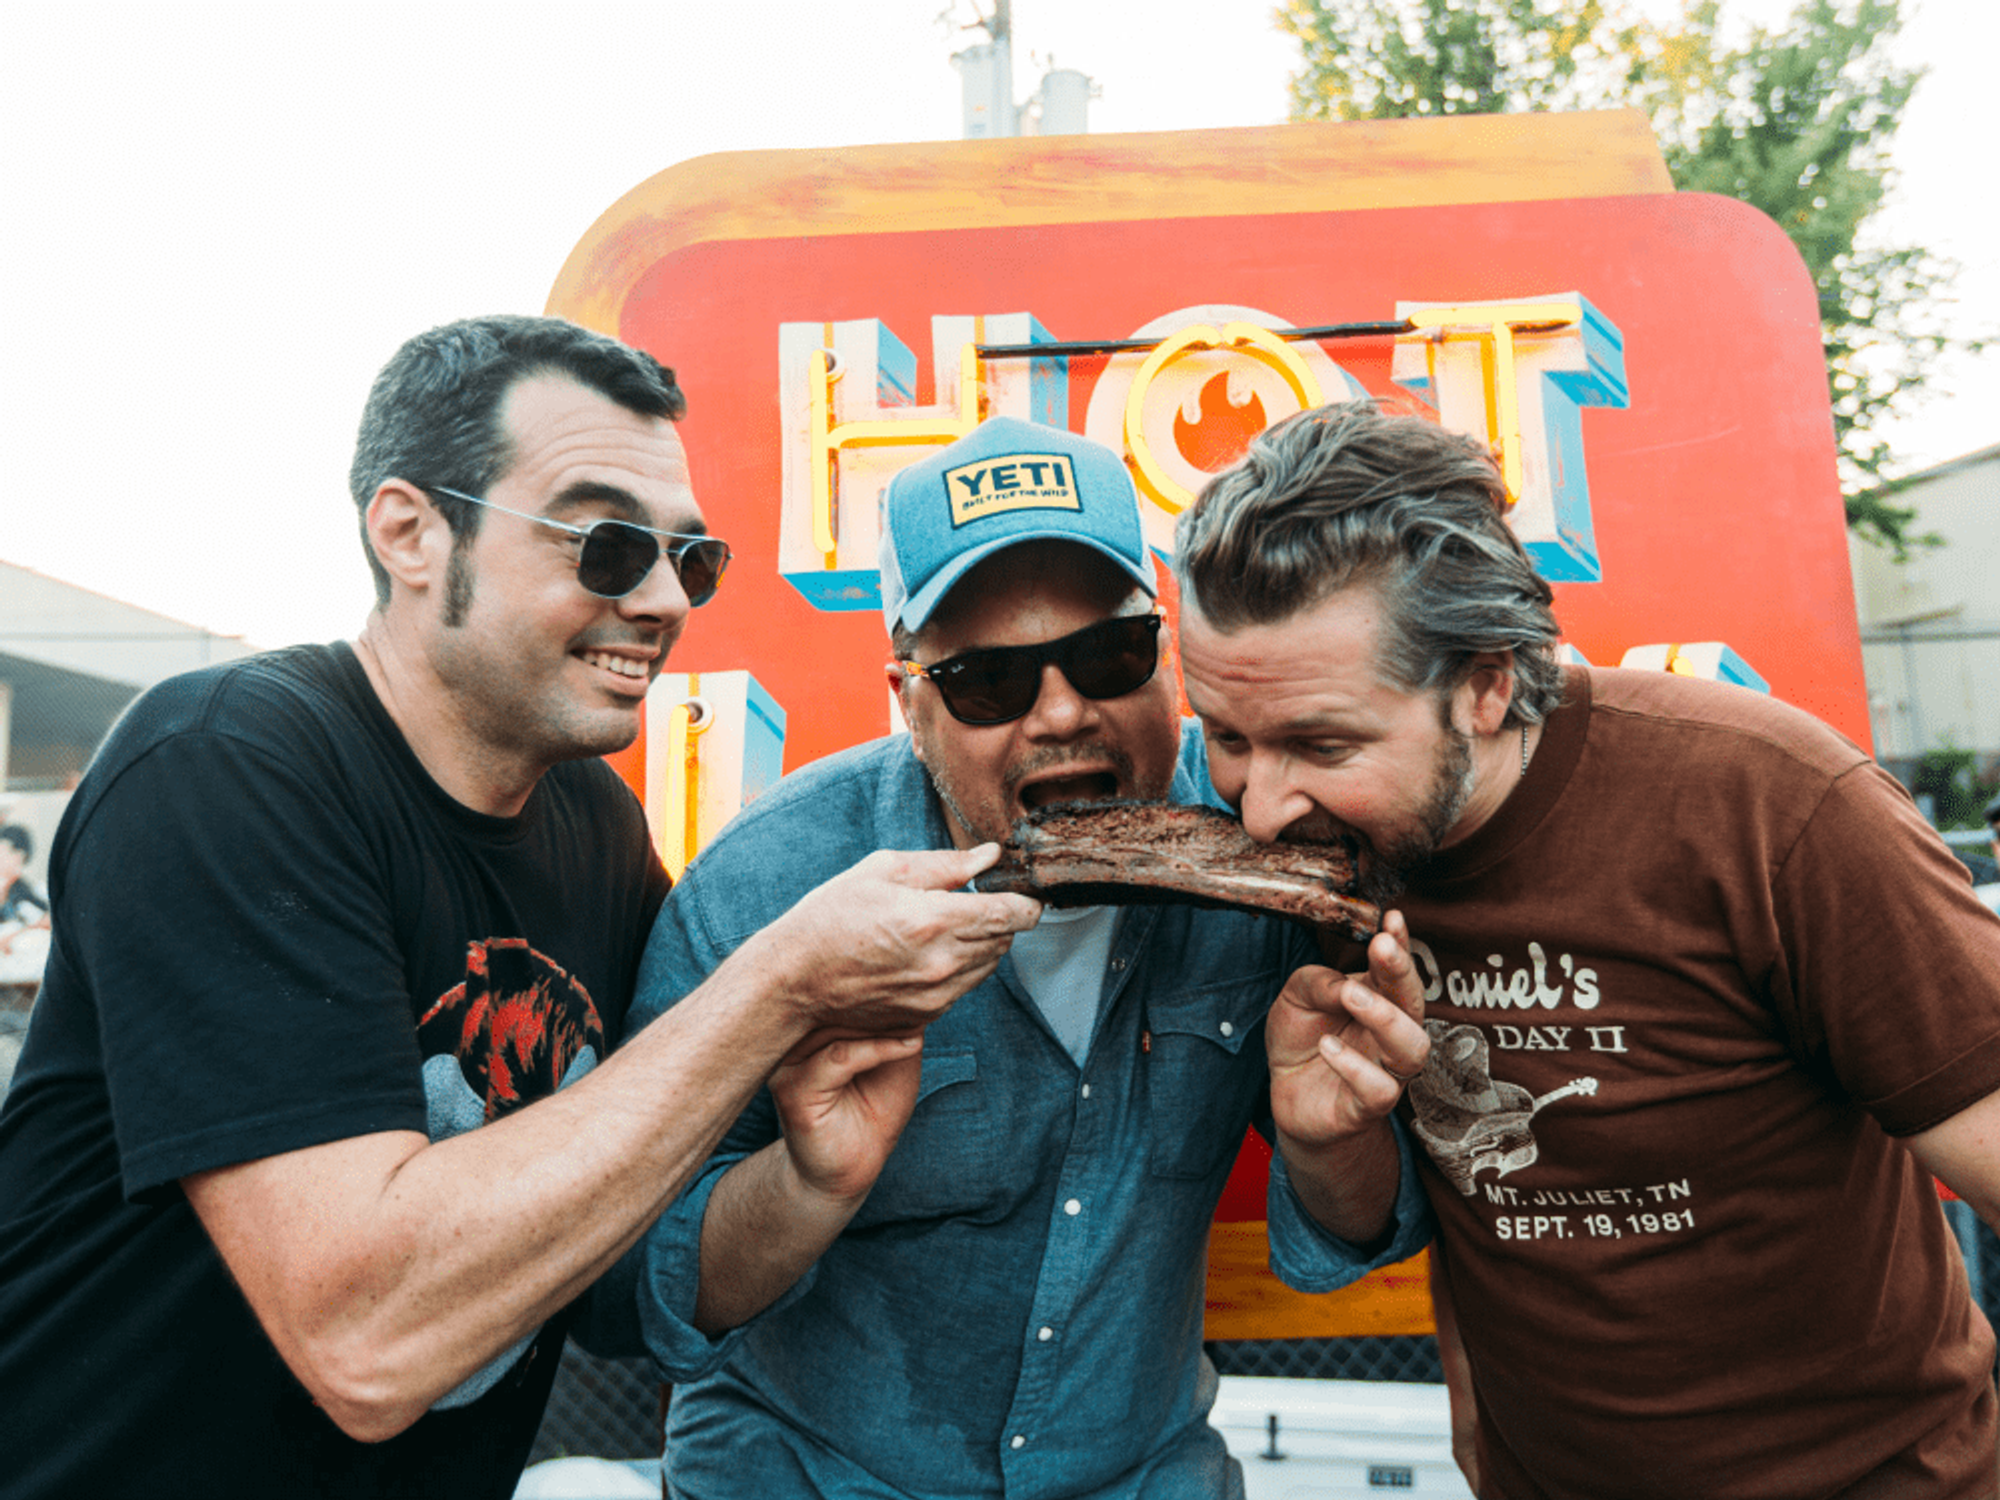 Experience a full weekend of food and music at the Hot Luck festival.